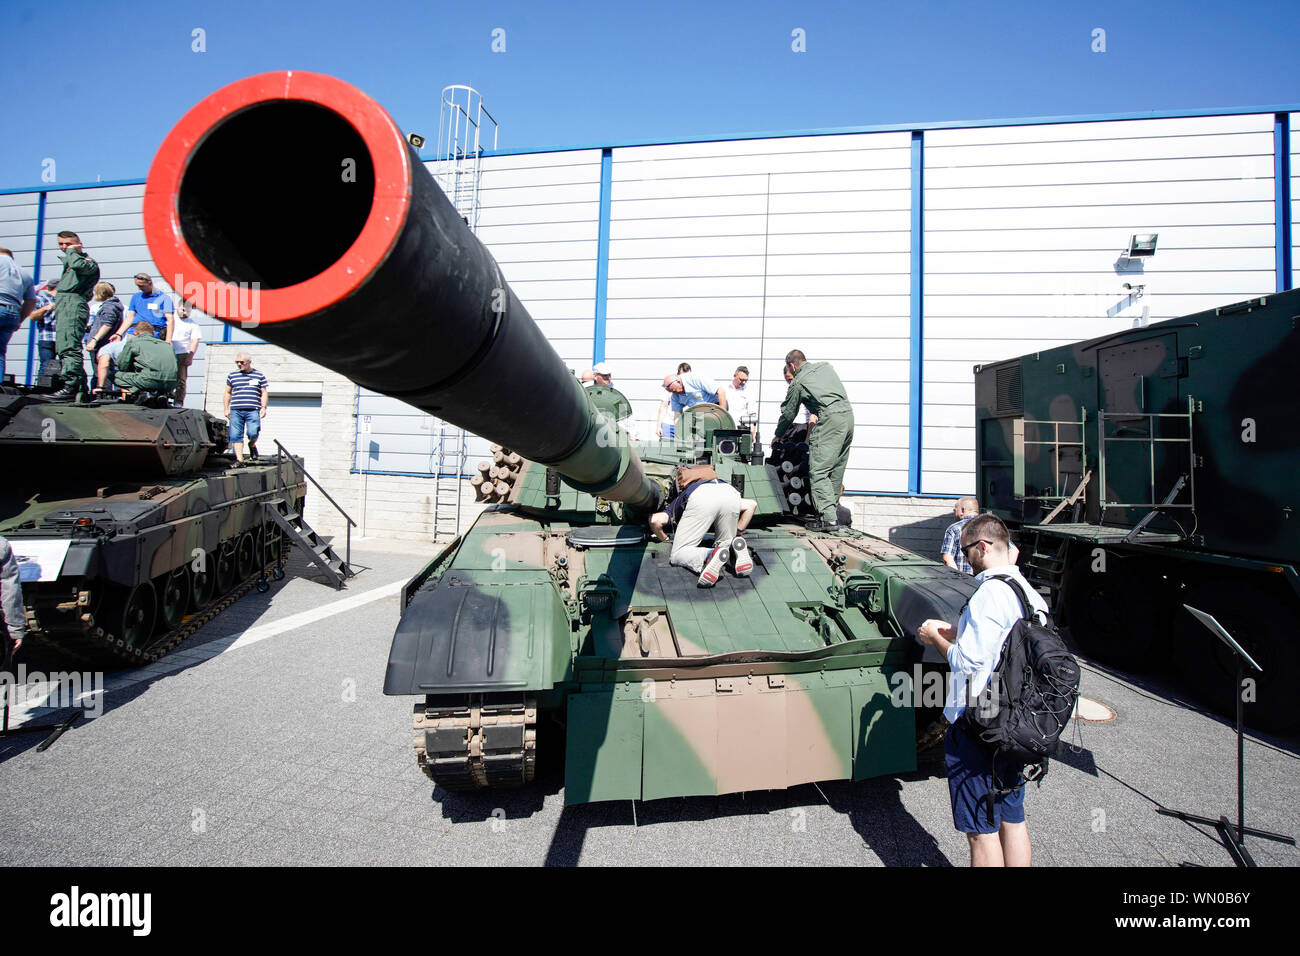 (190905) -- KIELCE (POLAND), Sept. 5, 2019 (Xinhua) -- People are seen on a Polish army T-72 tank at the 27th International Defence Industry Exhibition in Kielce, Poland, on Sept. 5, 2019. The 27th International Defence Industry Exhibition MSPO, one of the largest in Central and Eastern Europe with around 600 exhibitors, is held here from Sept. 3 to Sept. 6. (Photo by Jaap Arriens/Xinhua) Stock Photo